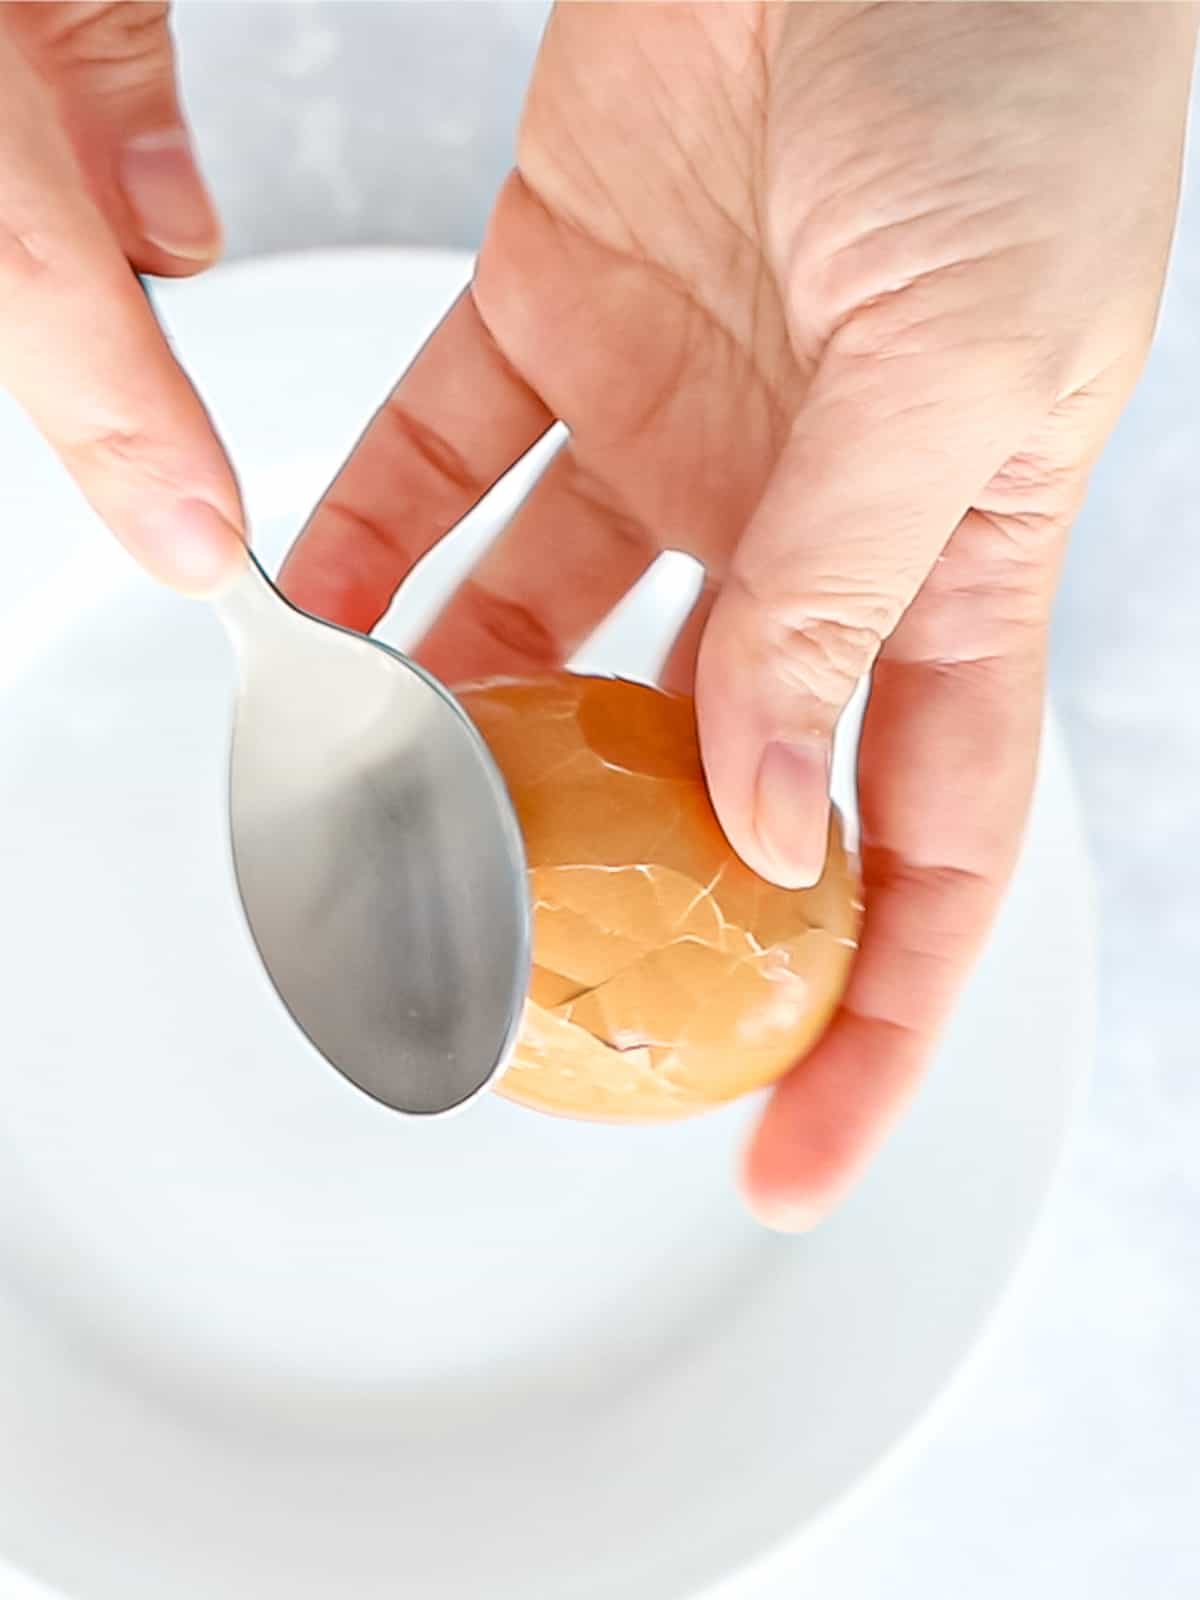 Cracking the shell of a soft boiled egg with the back of a spoon.